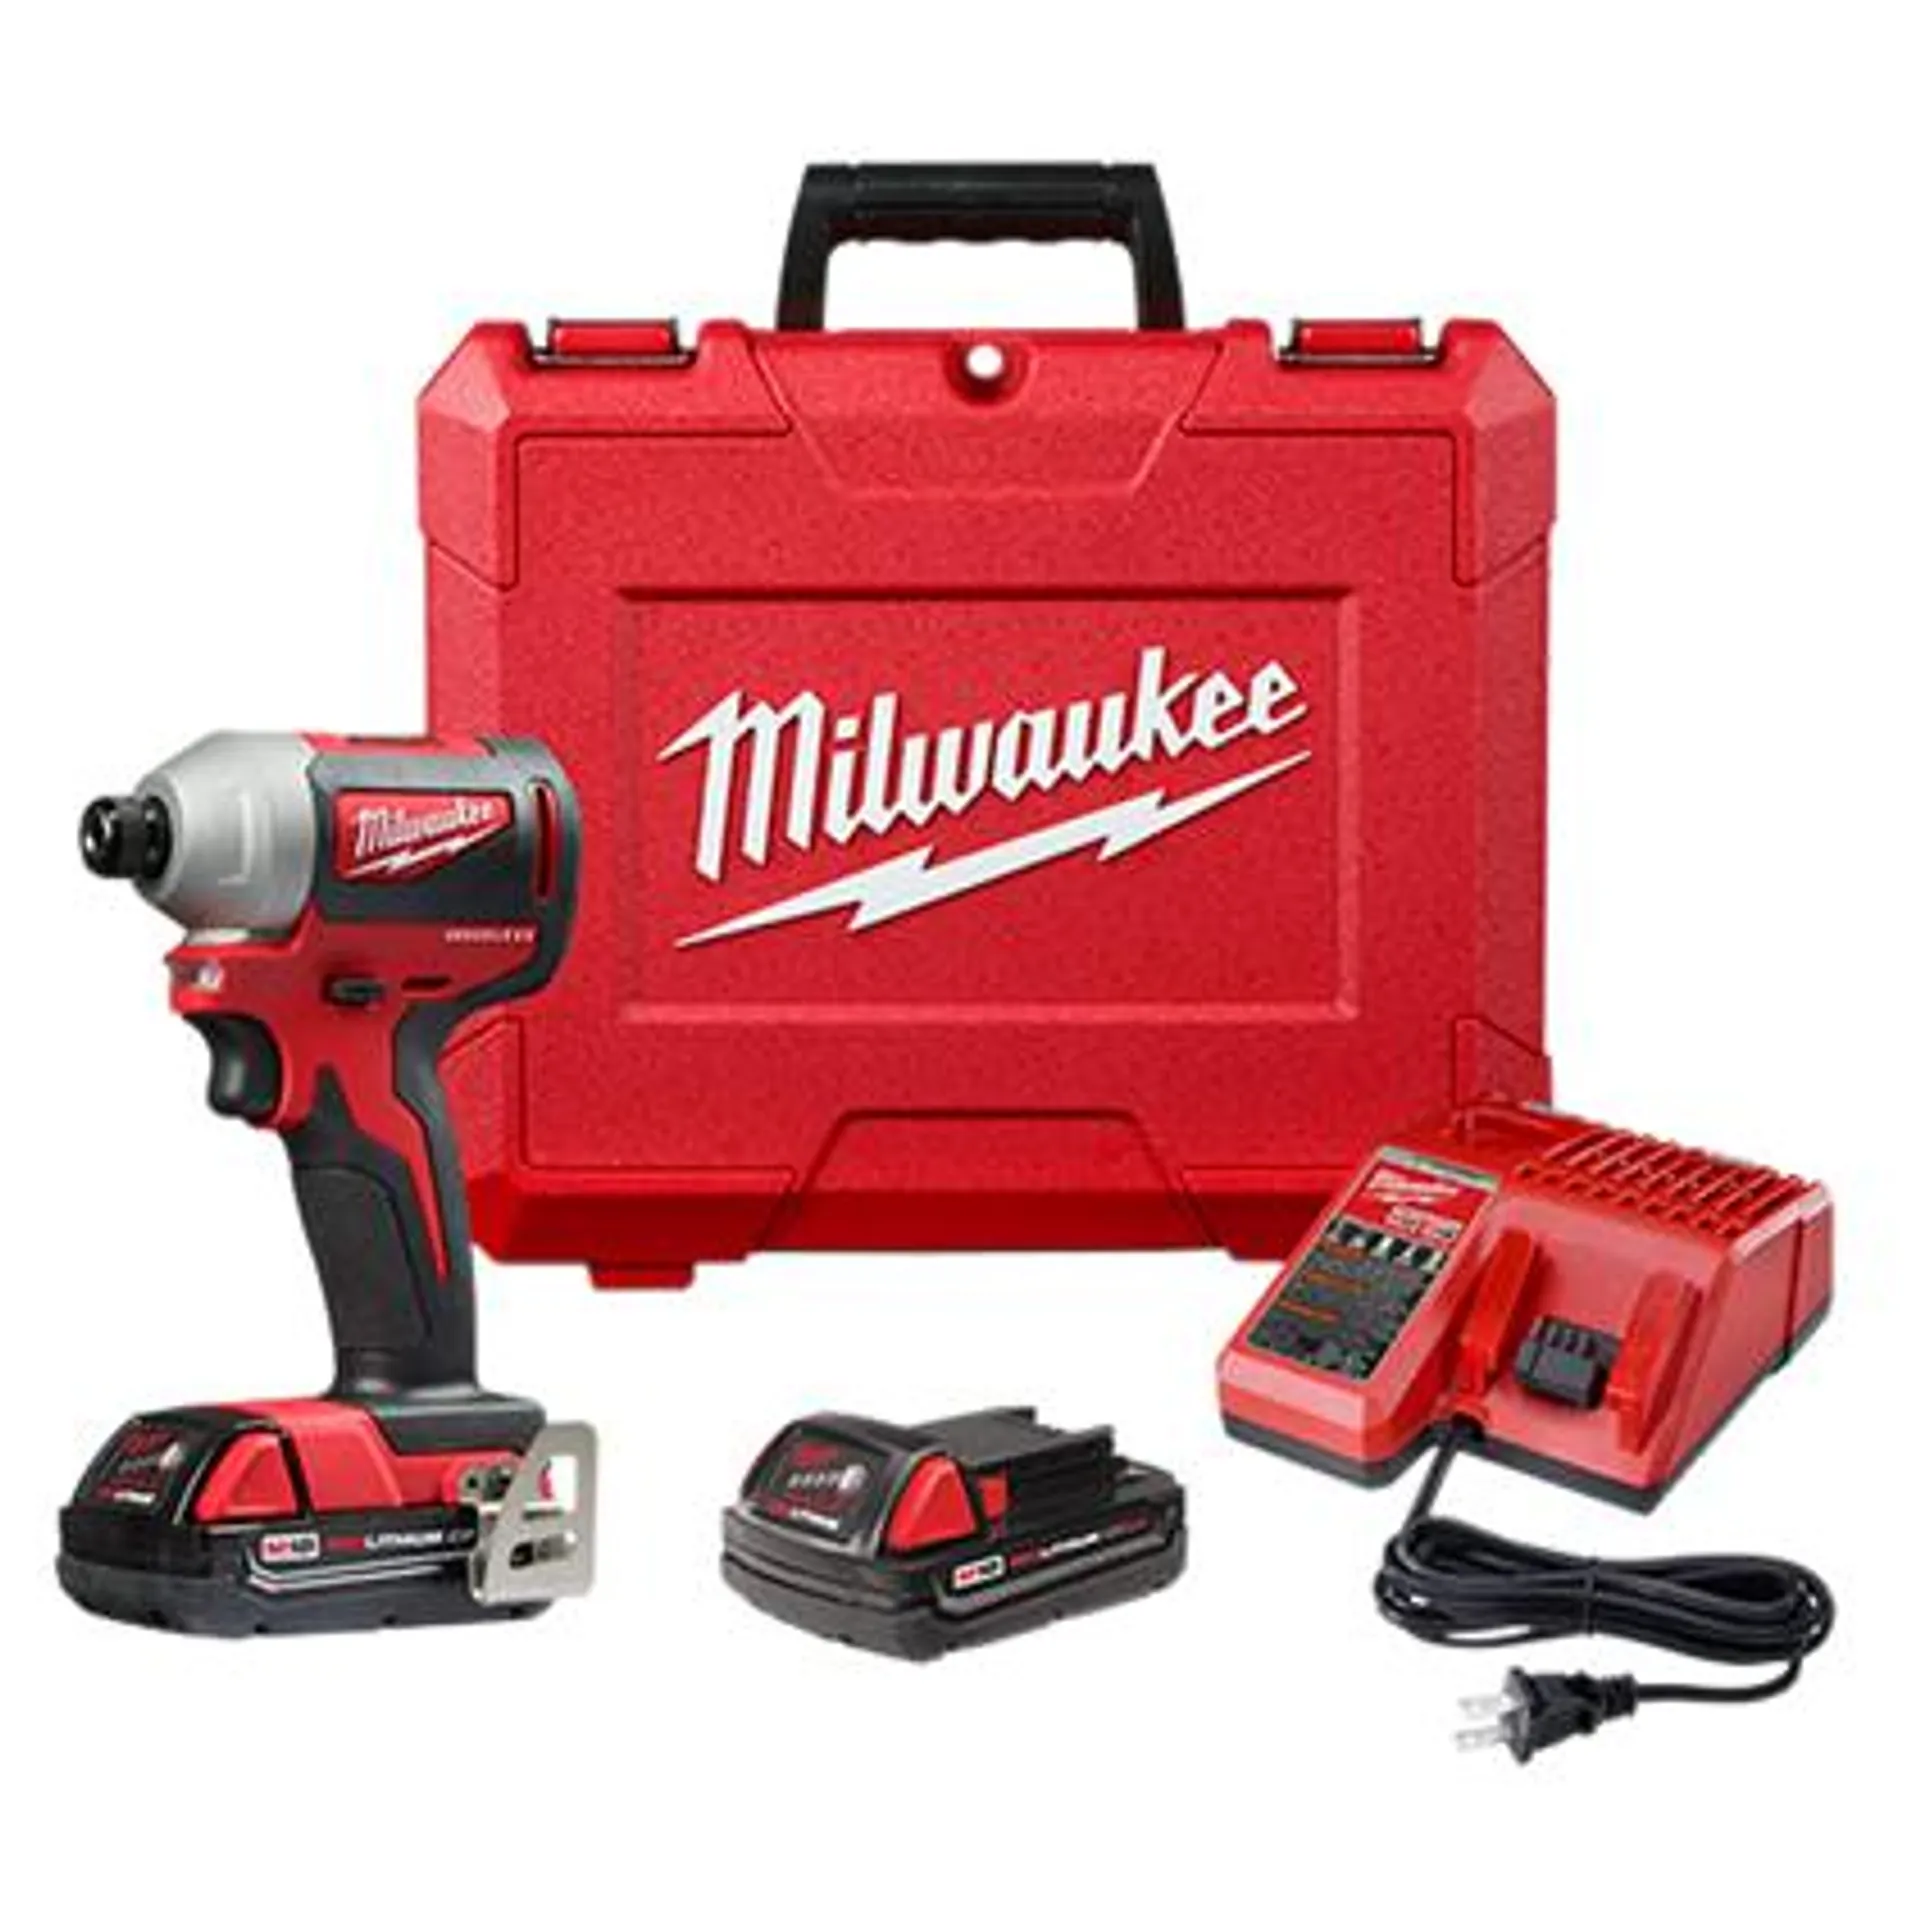 2850-22CT Impact Driver Kit, Battery Included, 18 V, 2 Ah, 1/4 in Drive, Hex Drive, 4200 ipm